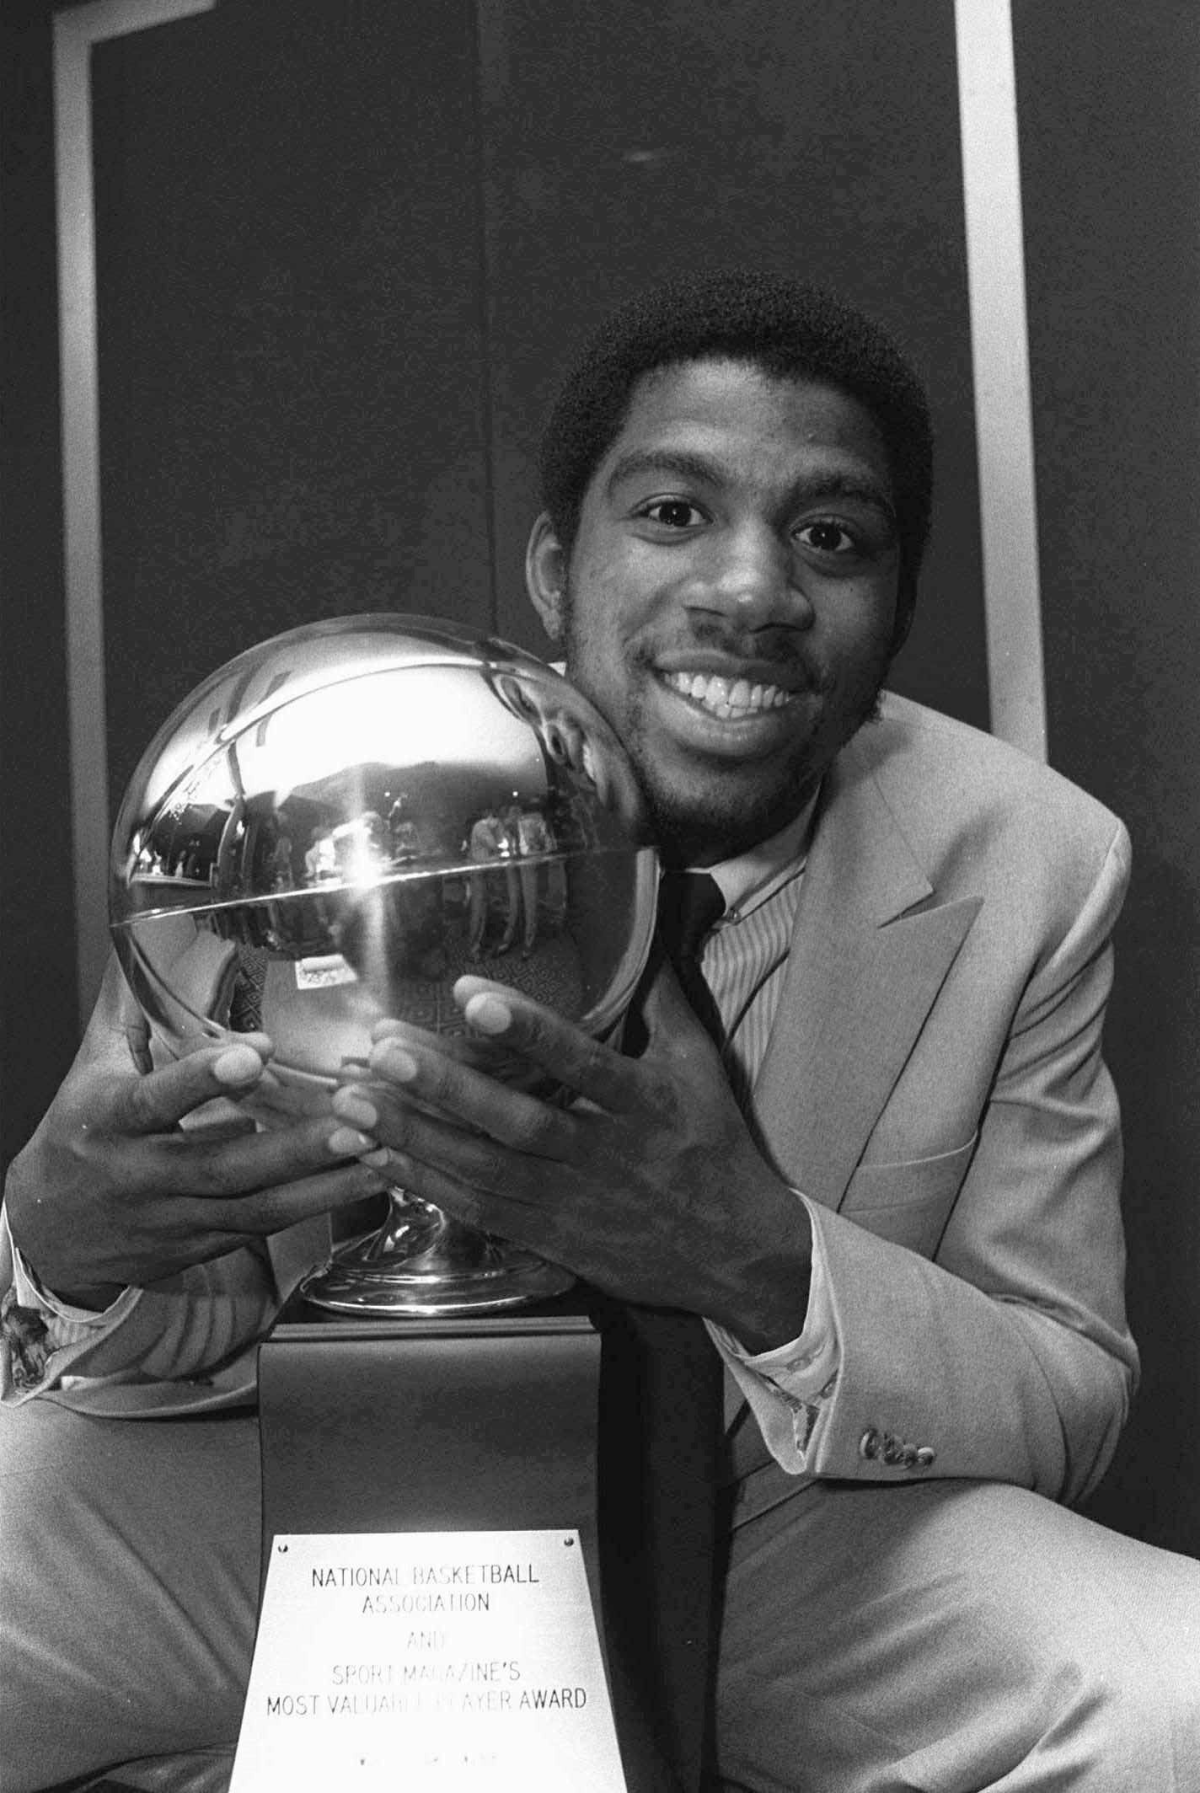 Magic Johnson was the MVP of the 1980 NBA Finals.